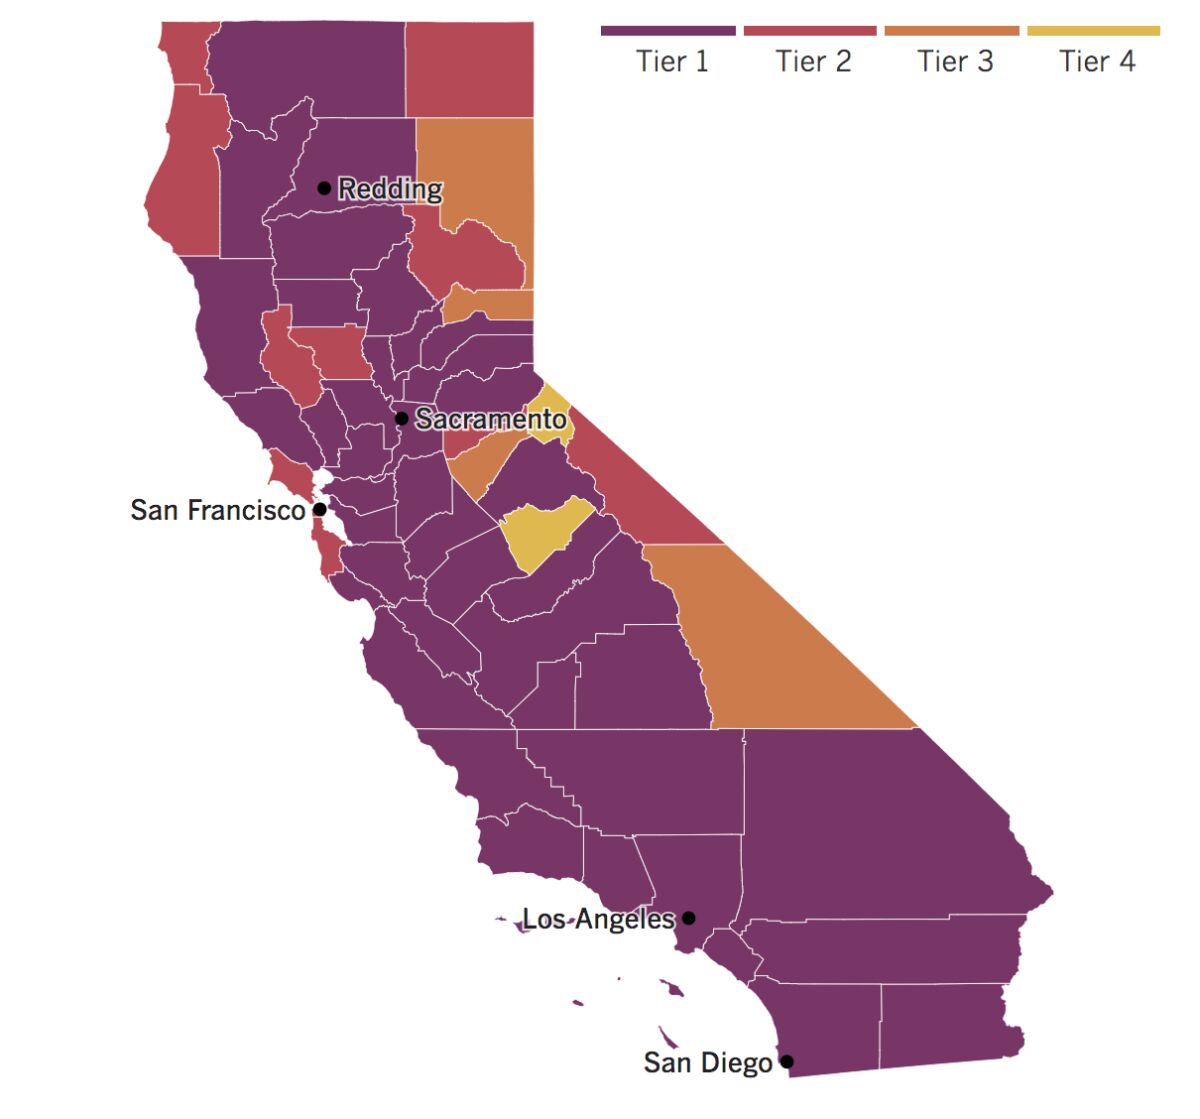 California's reopening tiers map